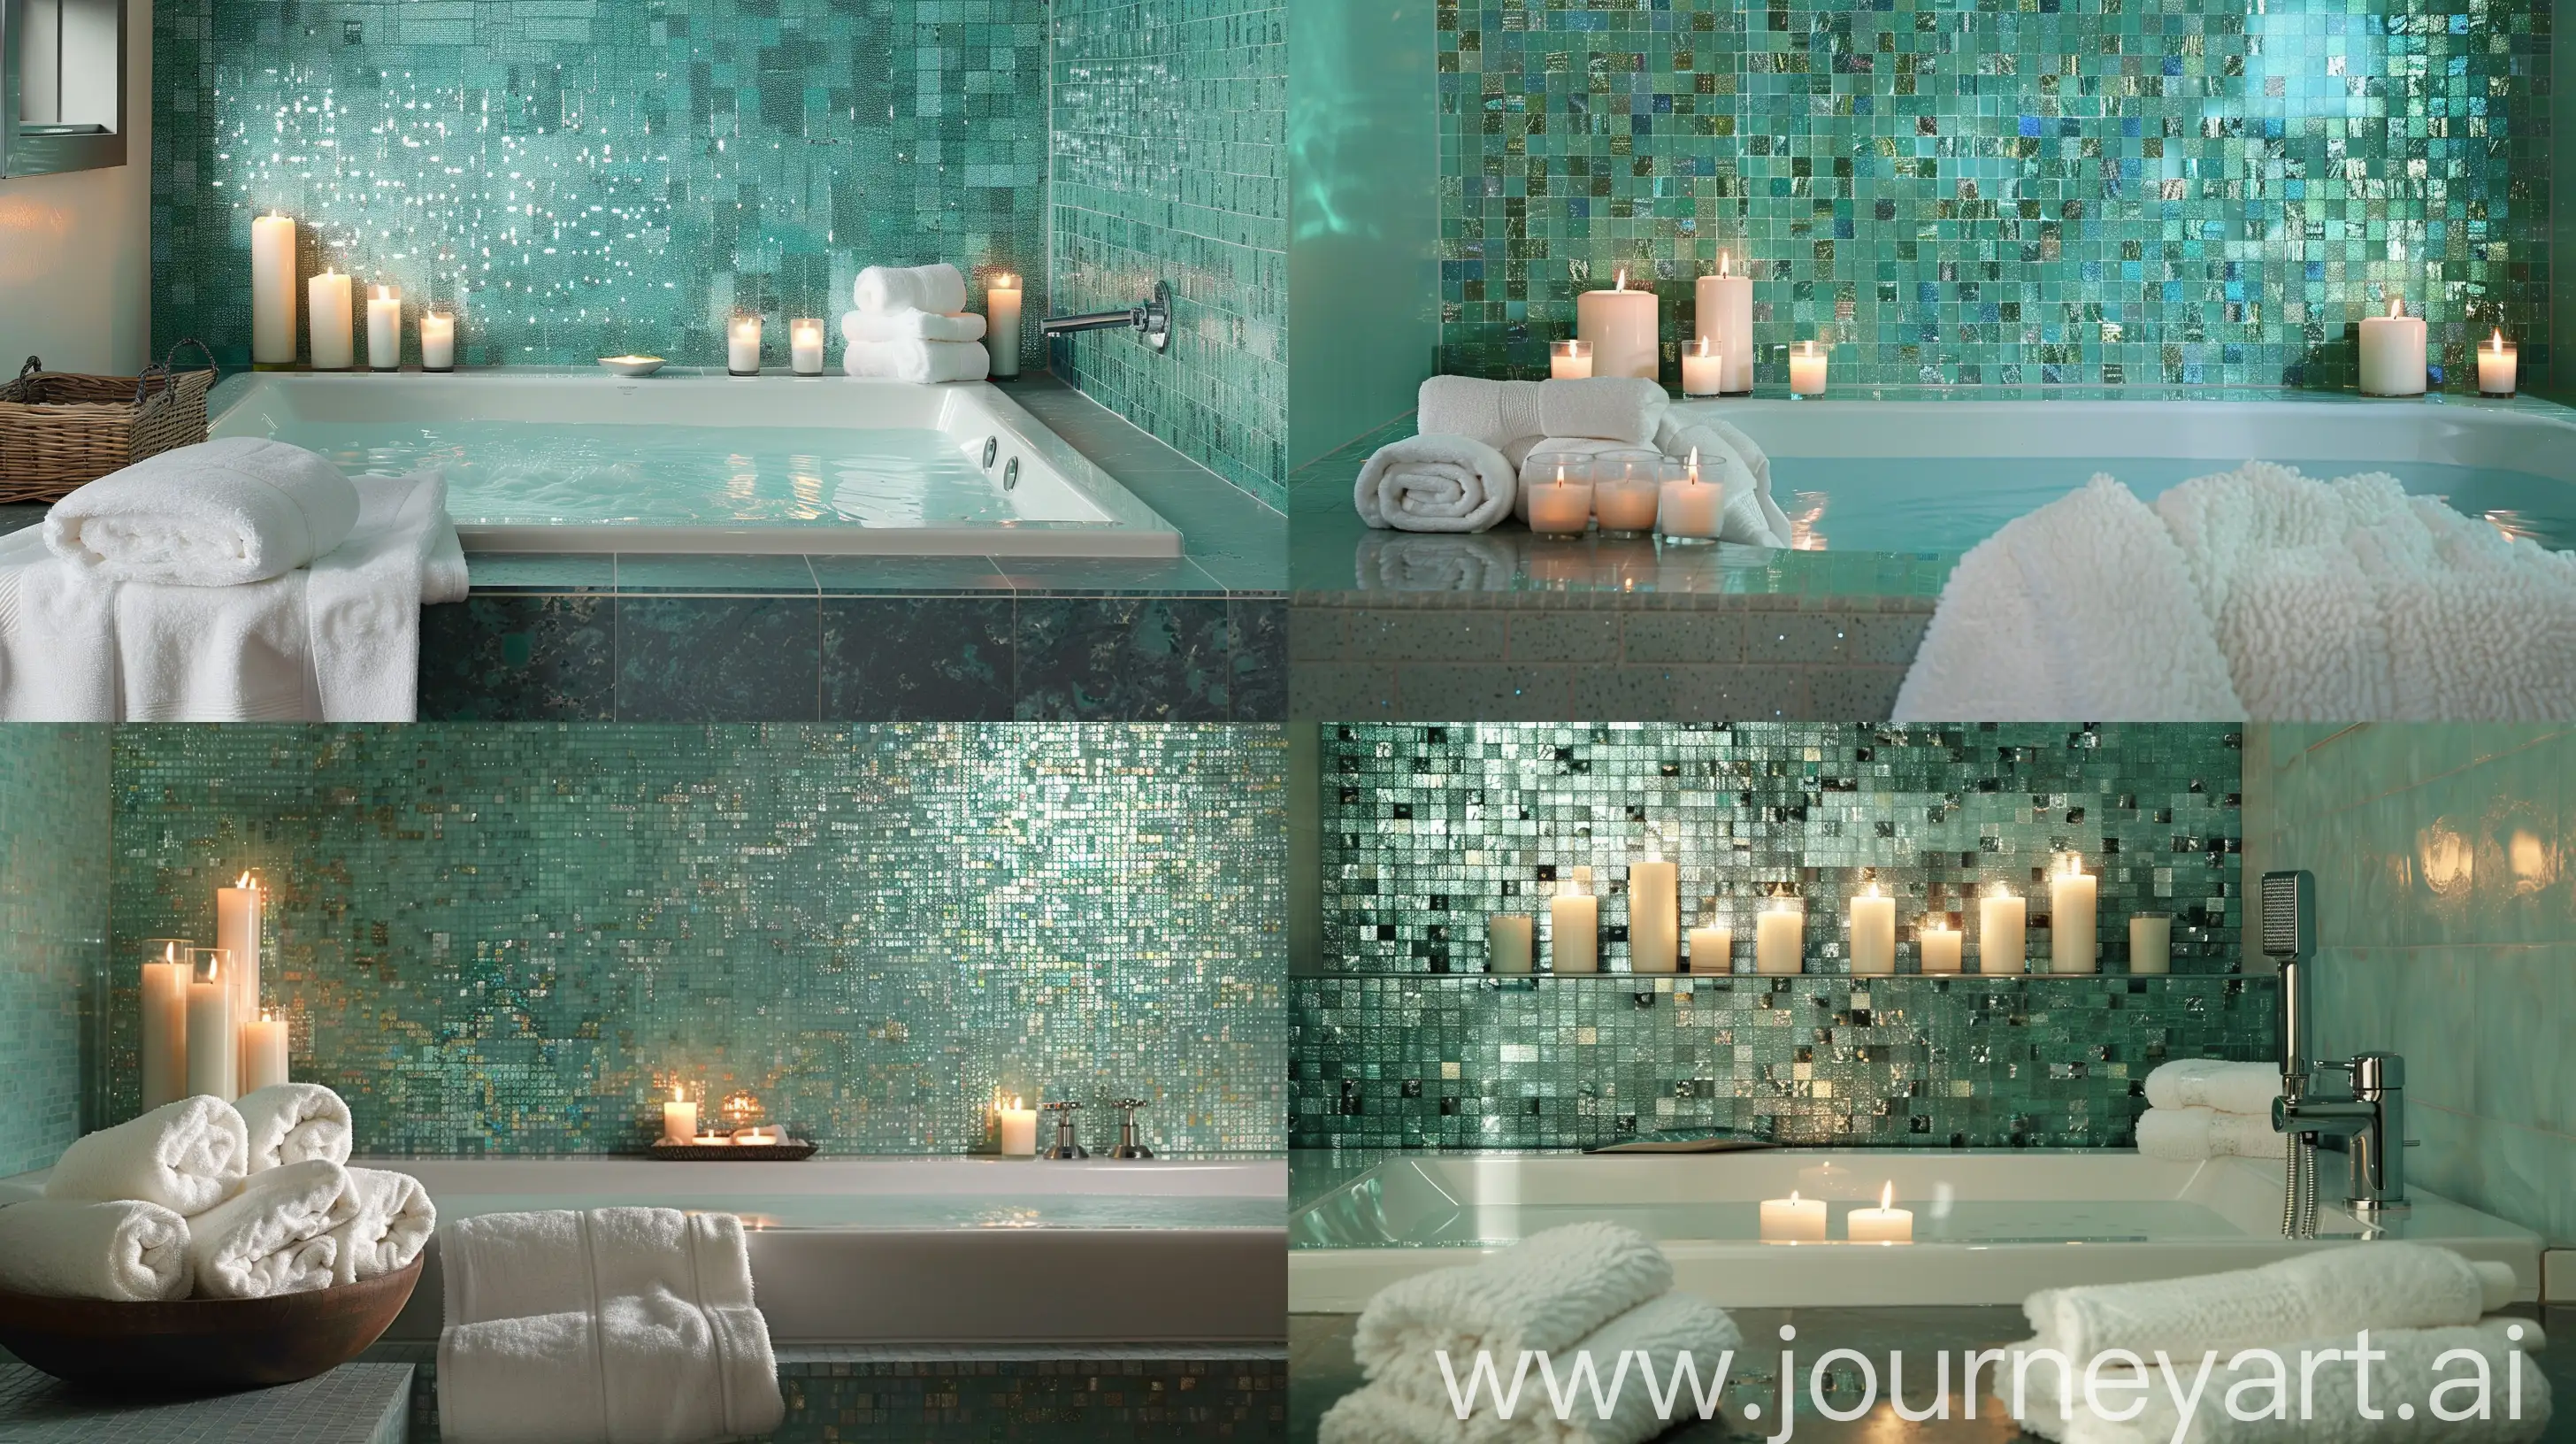 Step into a luxurious bath room with a touch of spa-inspired elegance. Imagine a deep soaking tub surrounded by candles, fluffy white towels, and a wall of shimmering mosaic tiles in shades of aquamarine and seafoam green. --ar 16:9